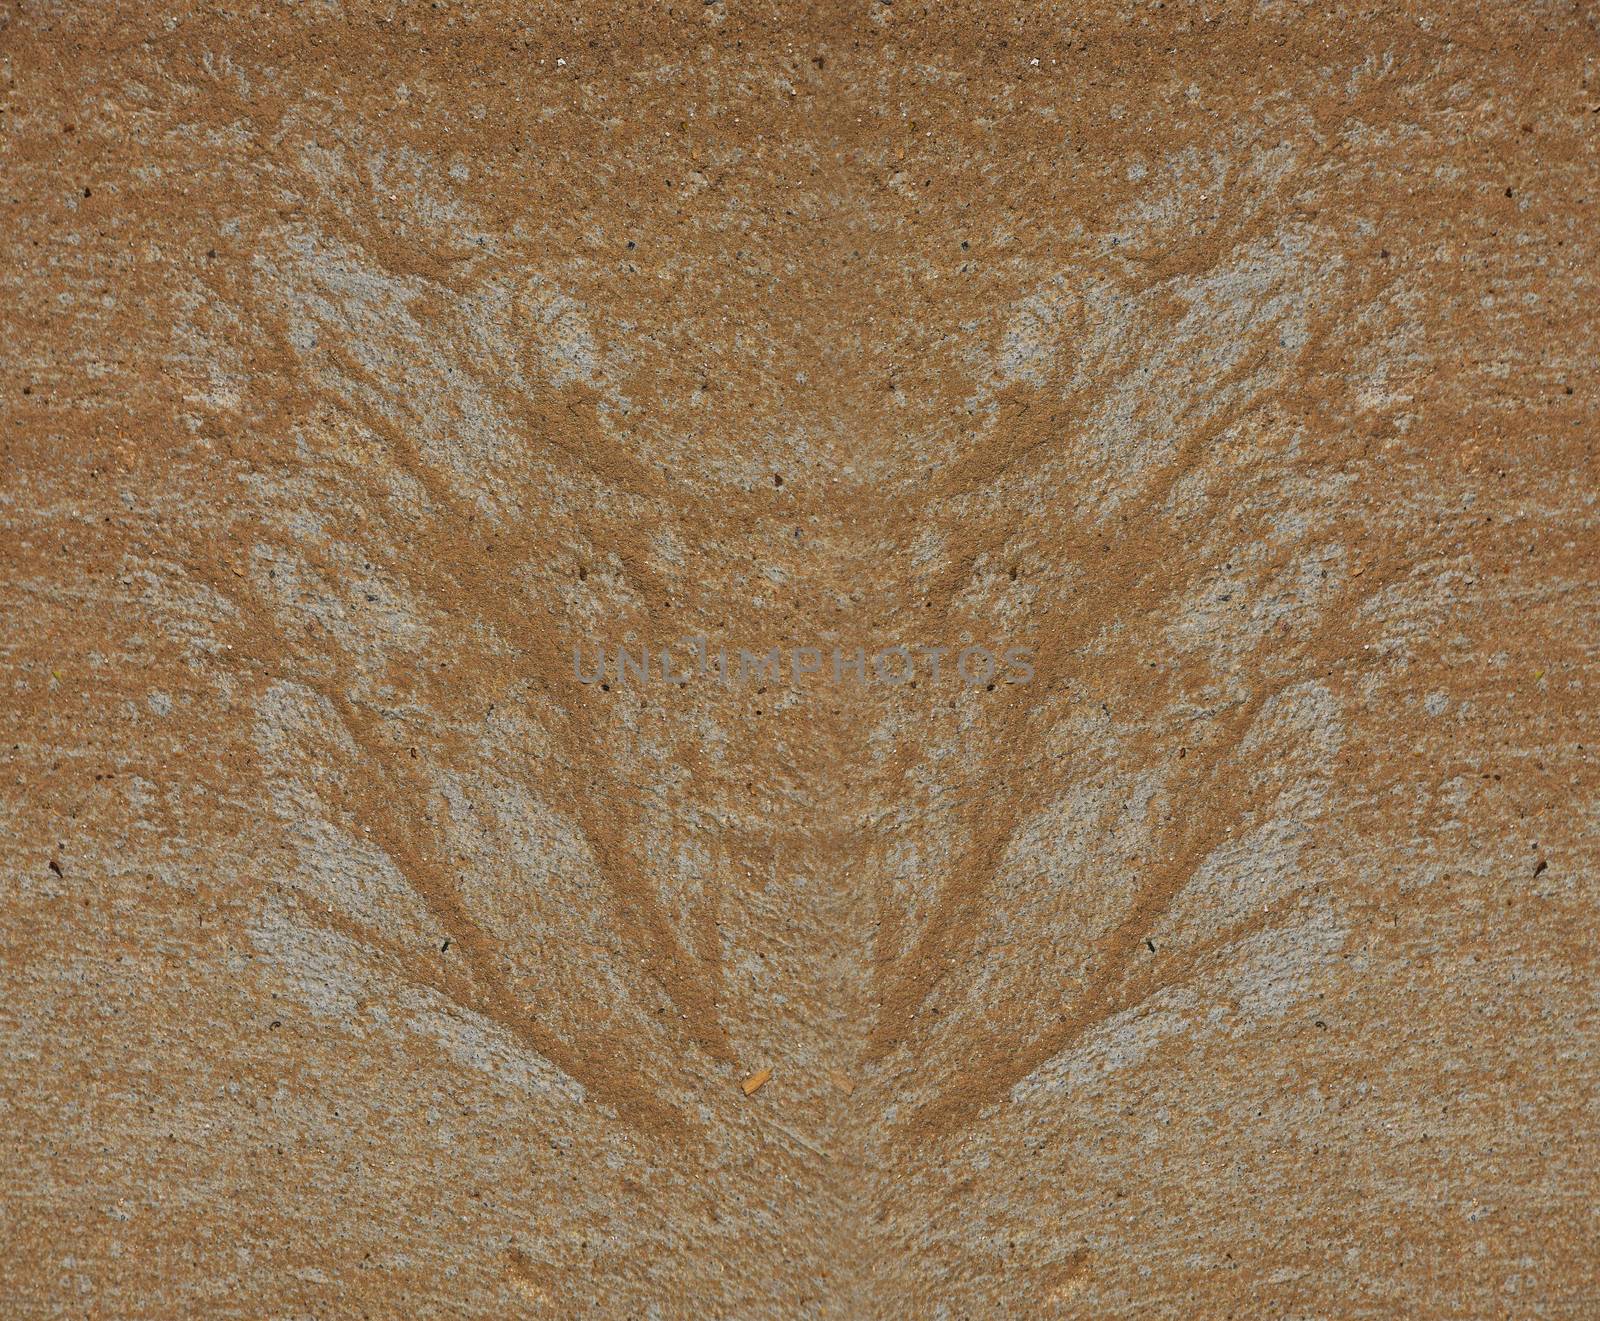 Silhouette of butterfly wings made of sand and gravel by water flow at concrete surface